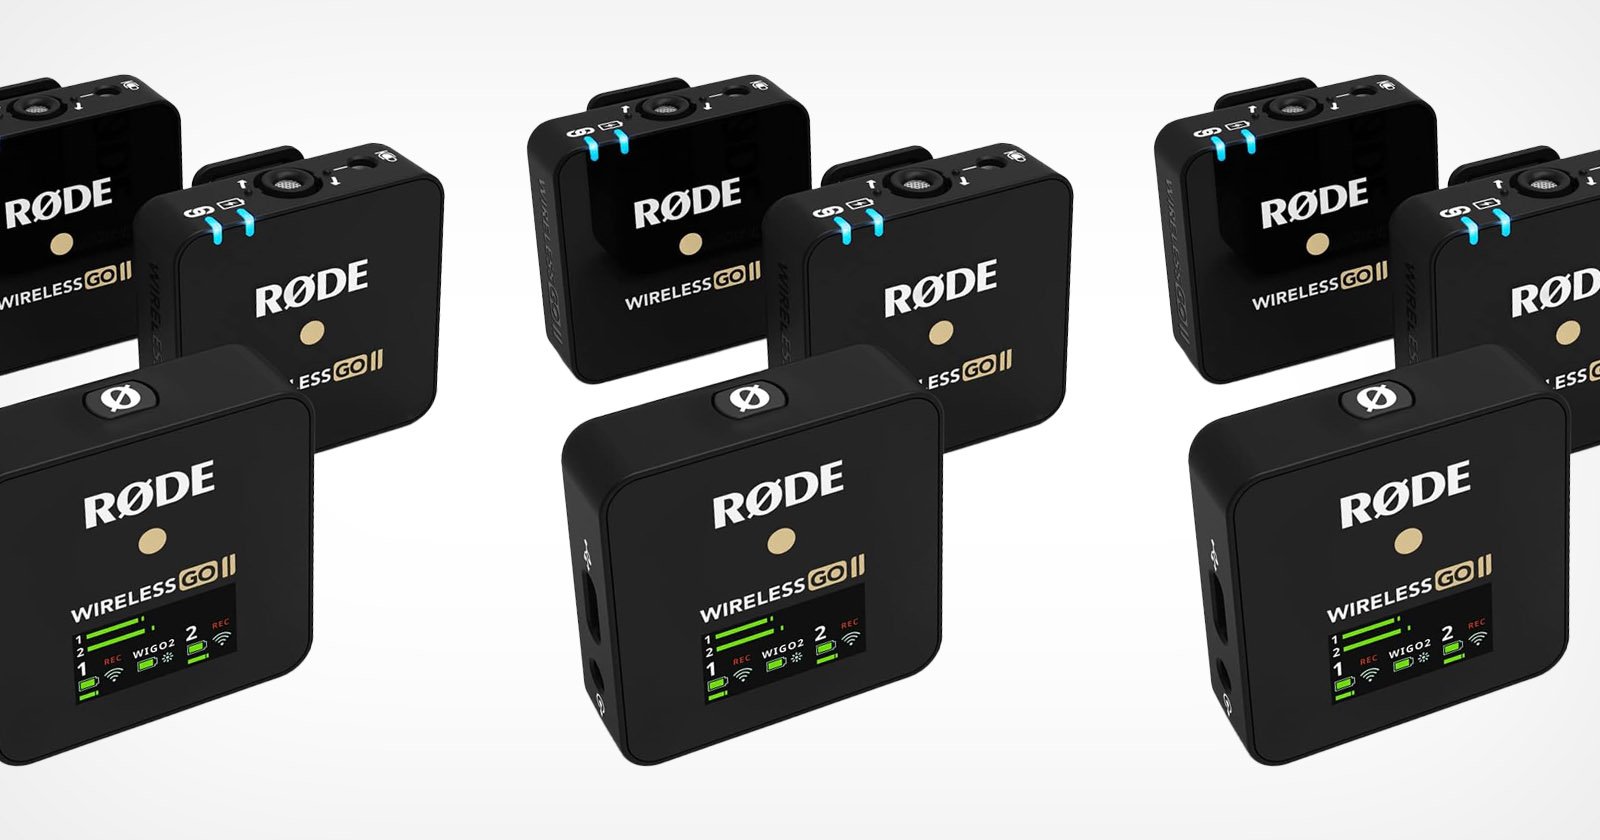  rode excellent wireless mics are 100 off right 